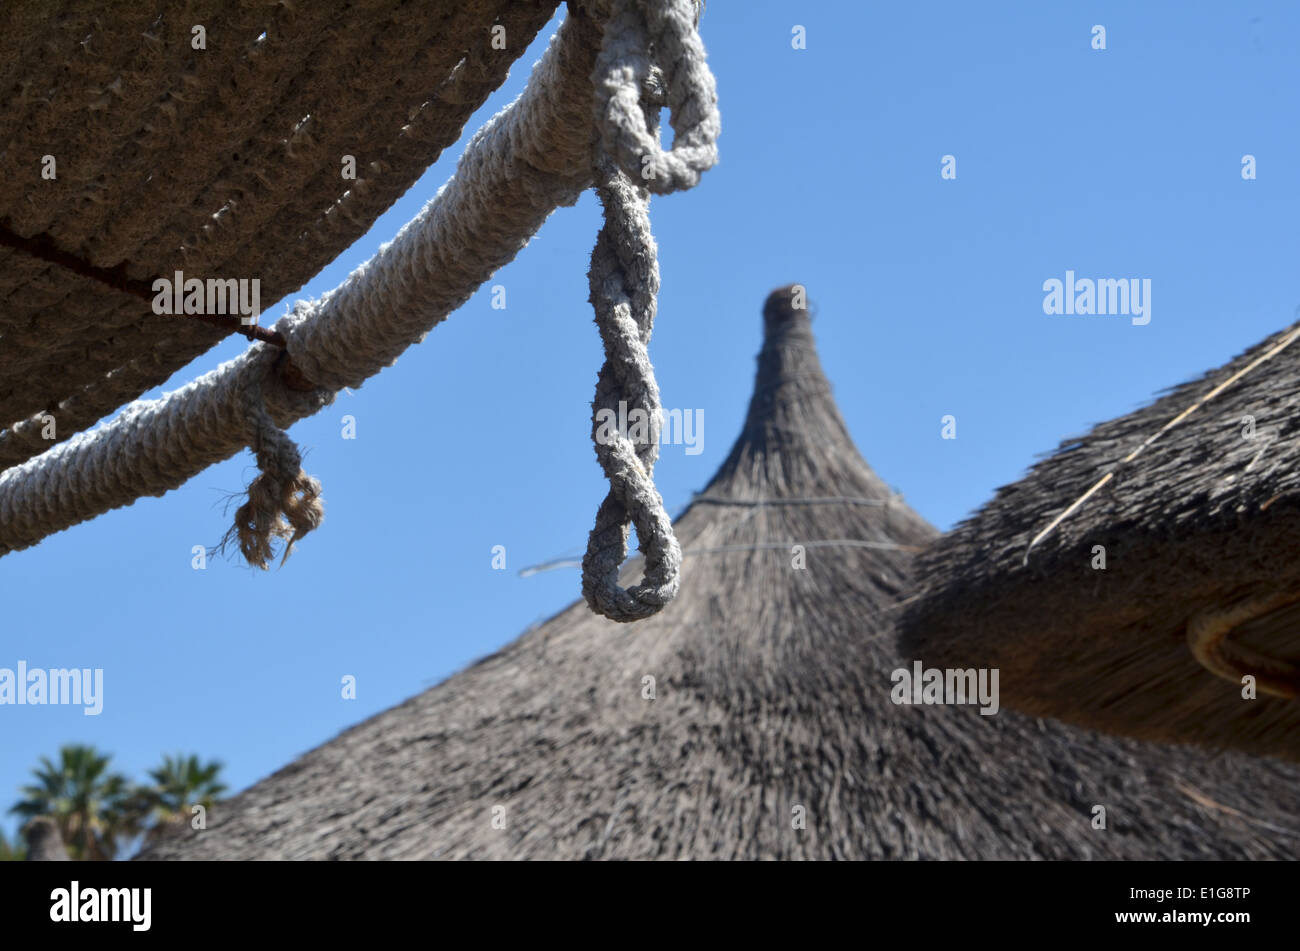 Thatched sun canopies on Coral Bay Beach, with hanging ropes Stock Photo